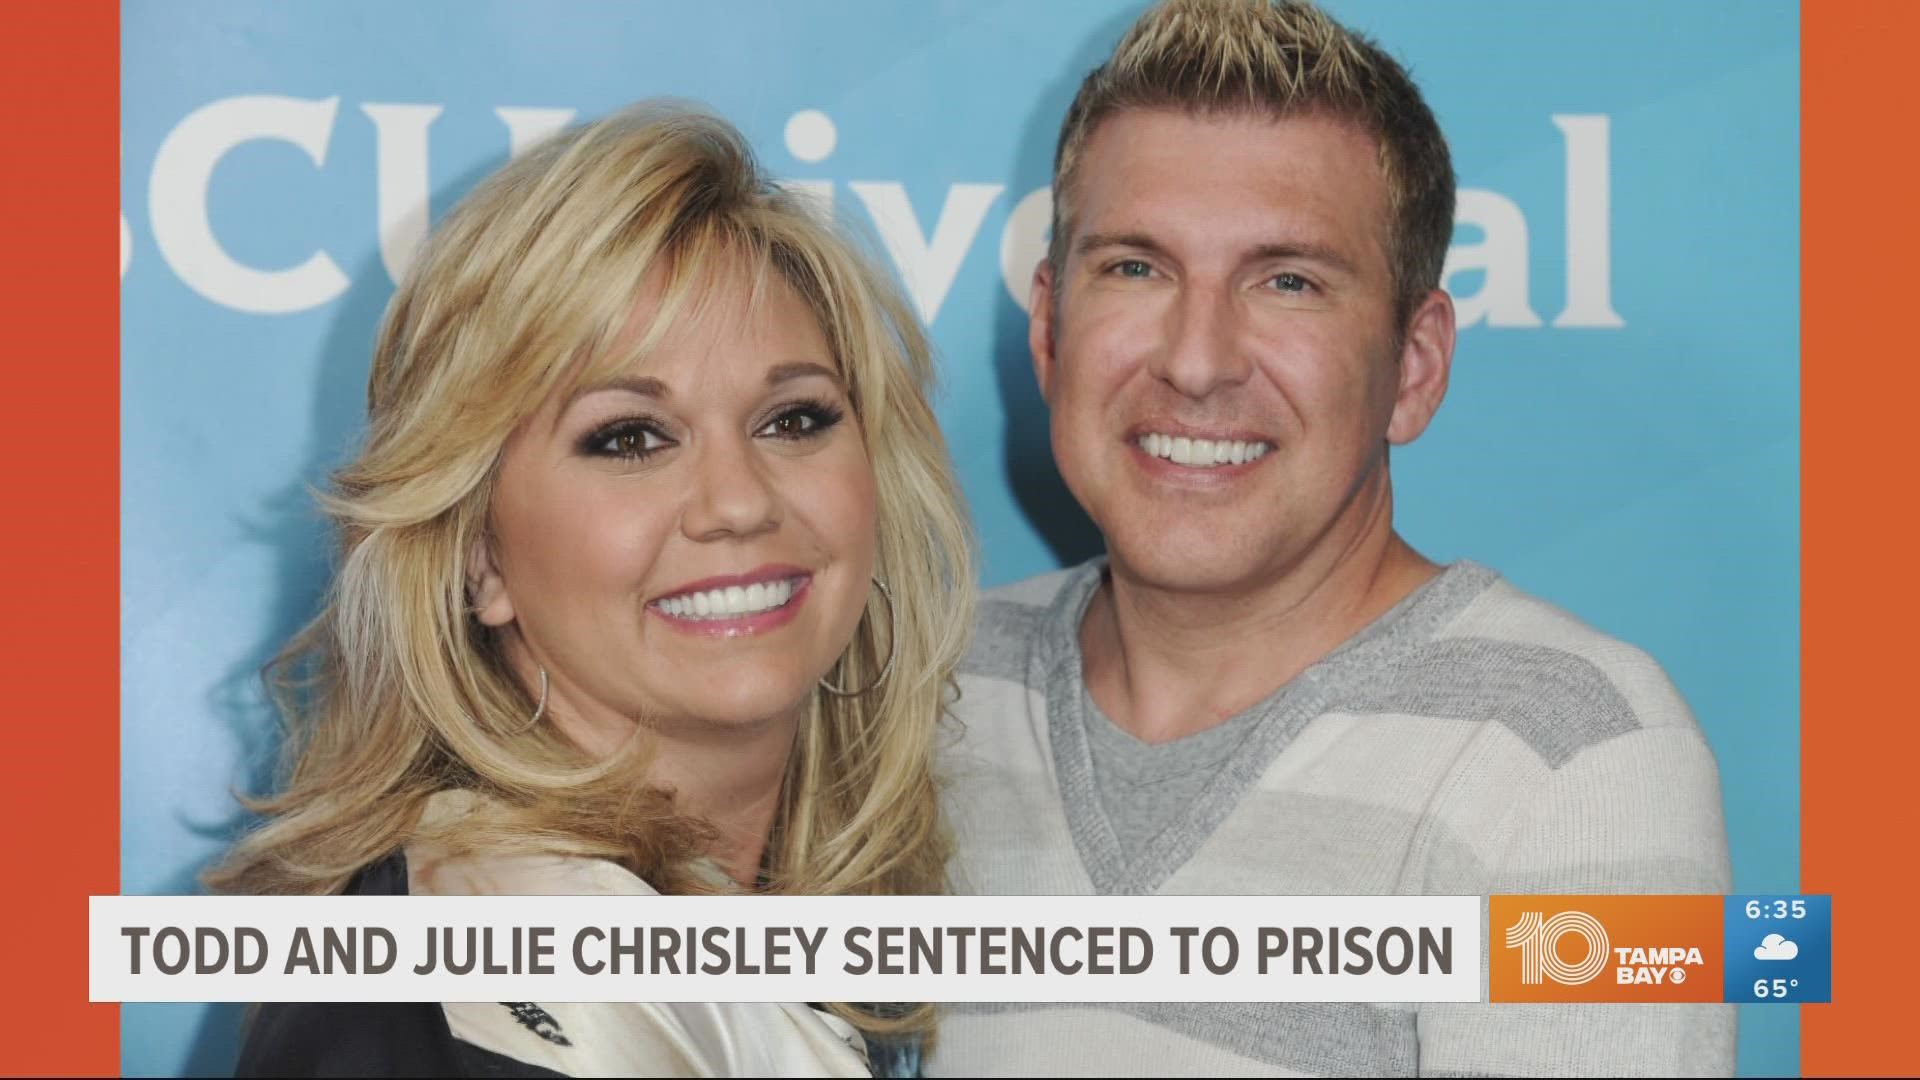 The Chrisleys, who gained fame on the show "Chrisley Knows Best," were convicted in June on charges of bank fraud, tax evasion and conspiring to defraud the IRS.